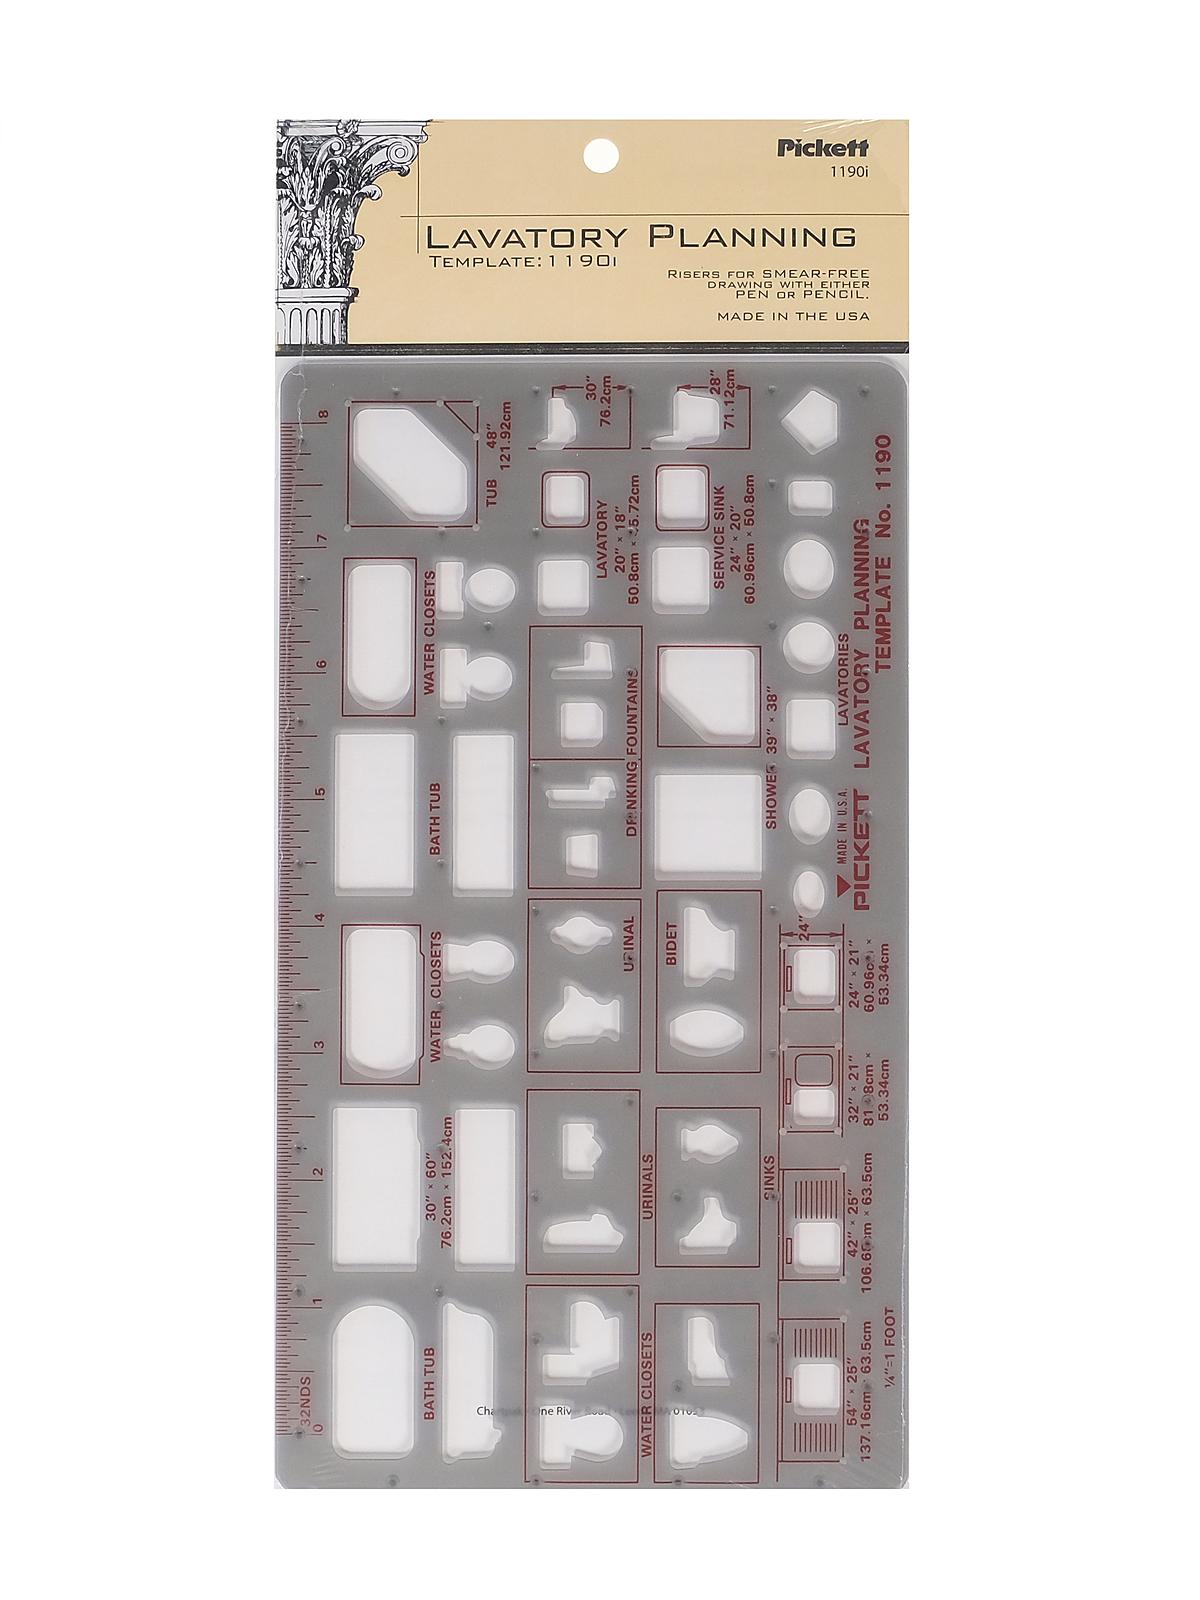 Plumbing Drafting Templates Lavatory Planning 1 4 In. = 1 Ft.